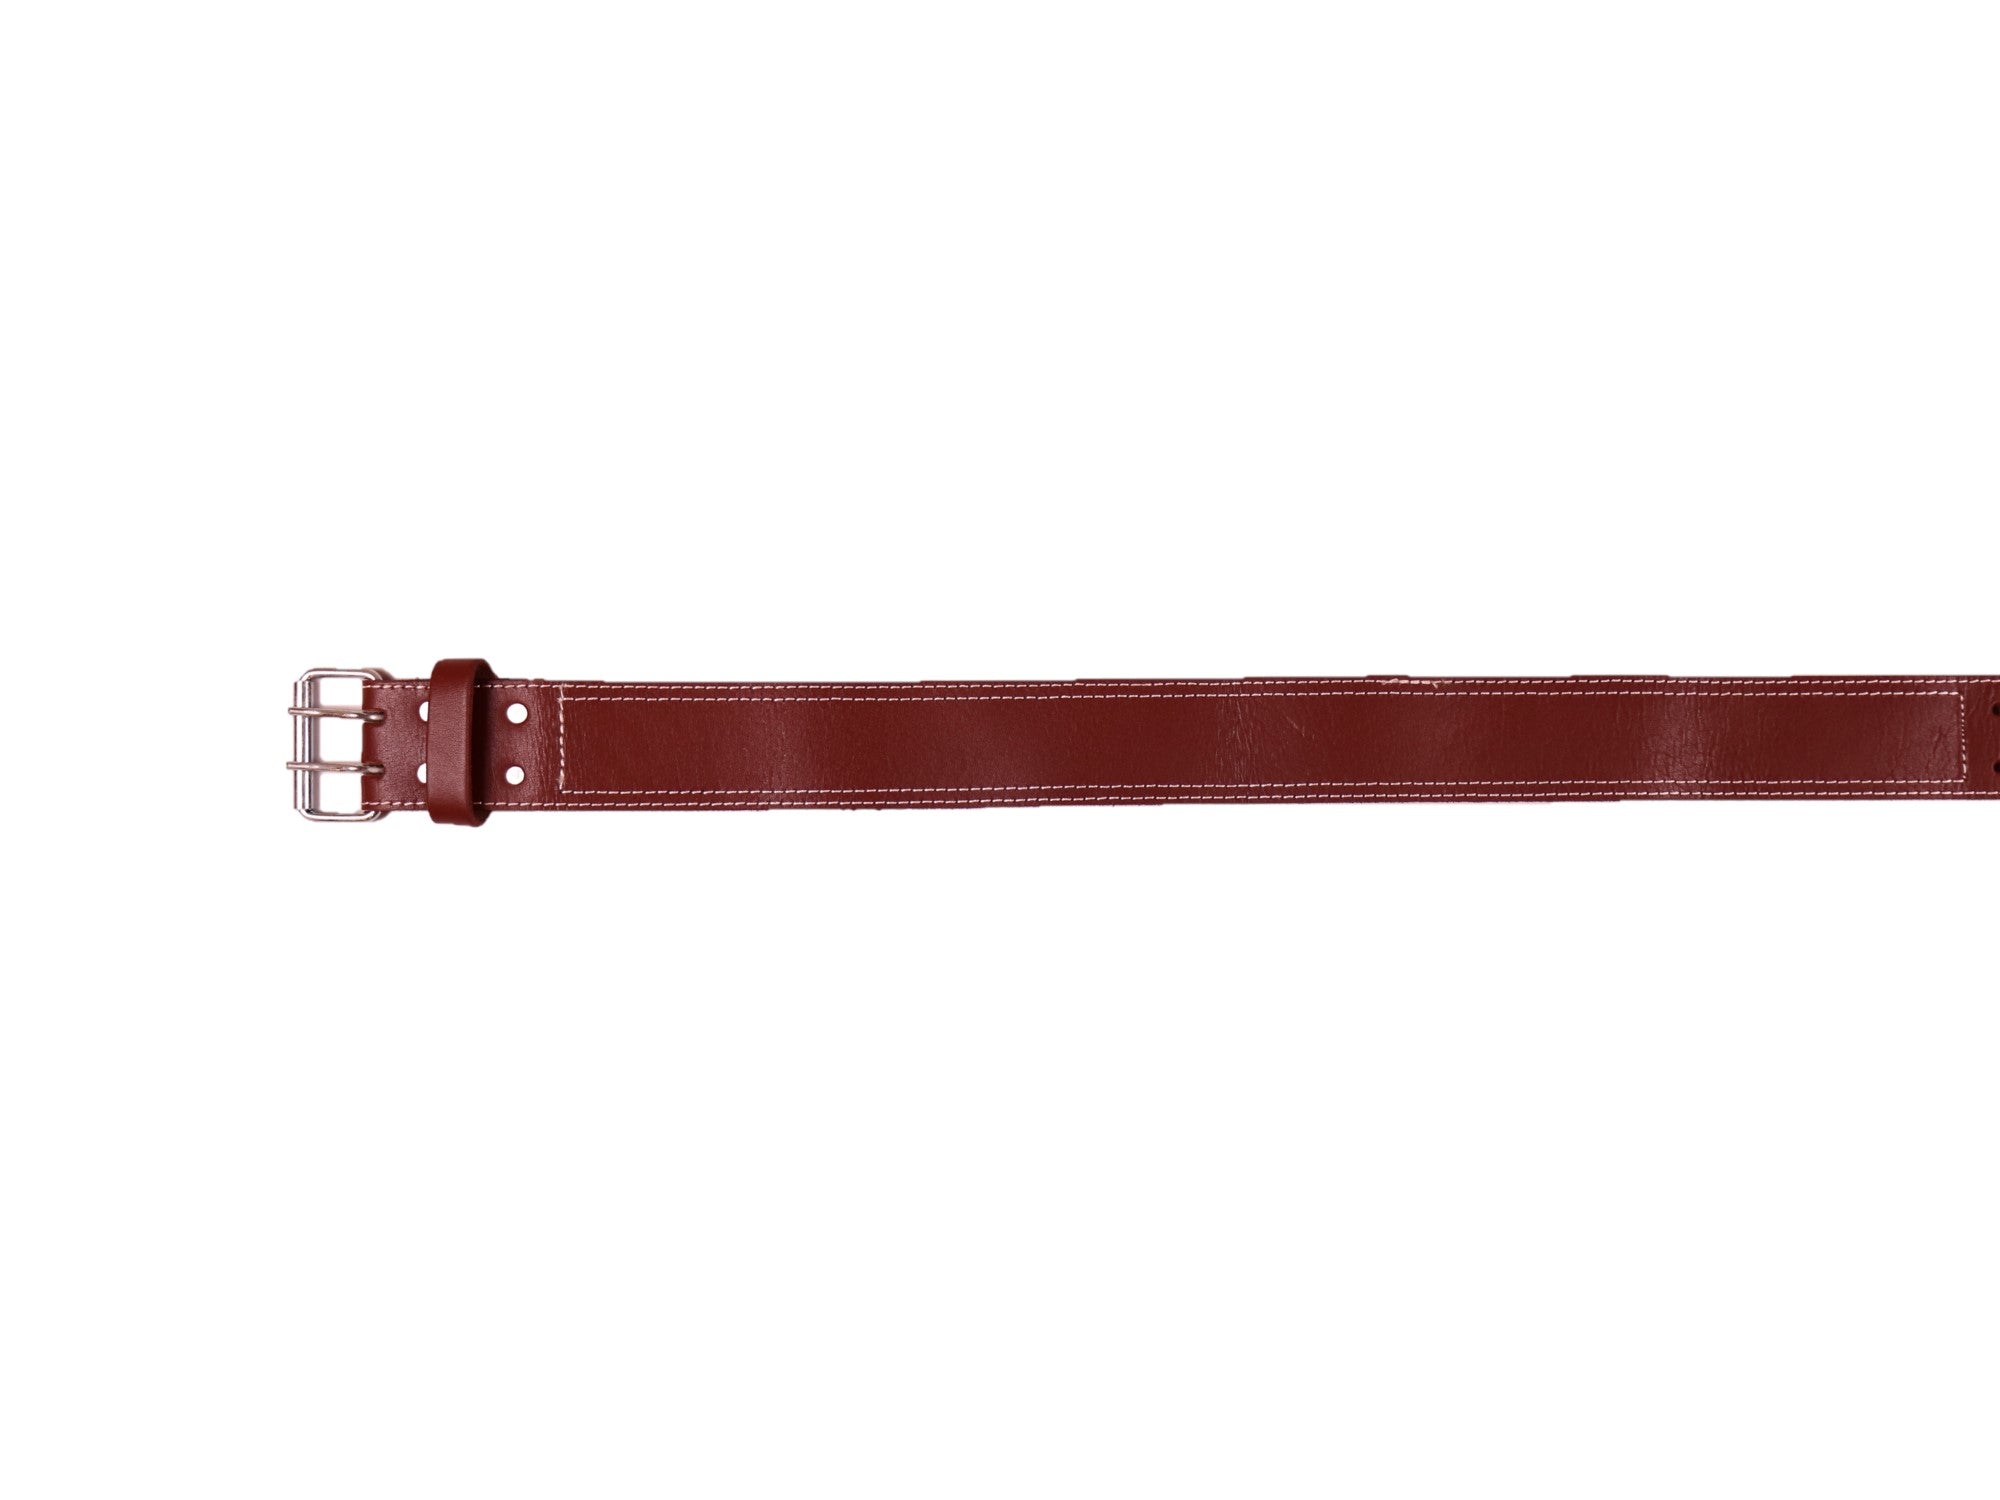 Trutuch Brown Leather Work Tool Belt, 2.5" Natural Leather Pouch Belt, Non Padded Tool Bag Belt, TT-700-B